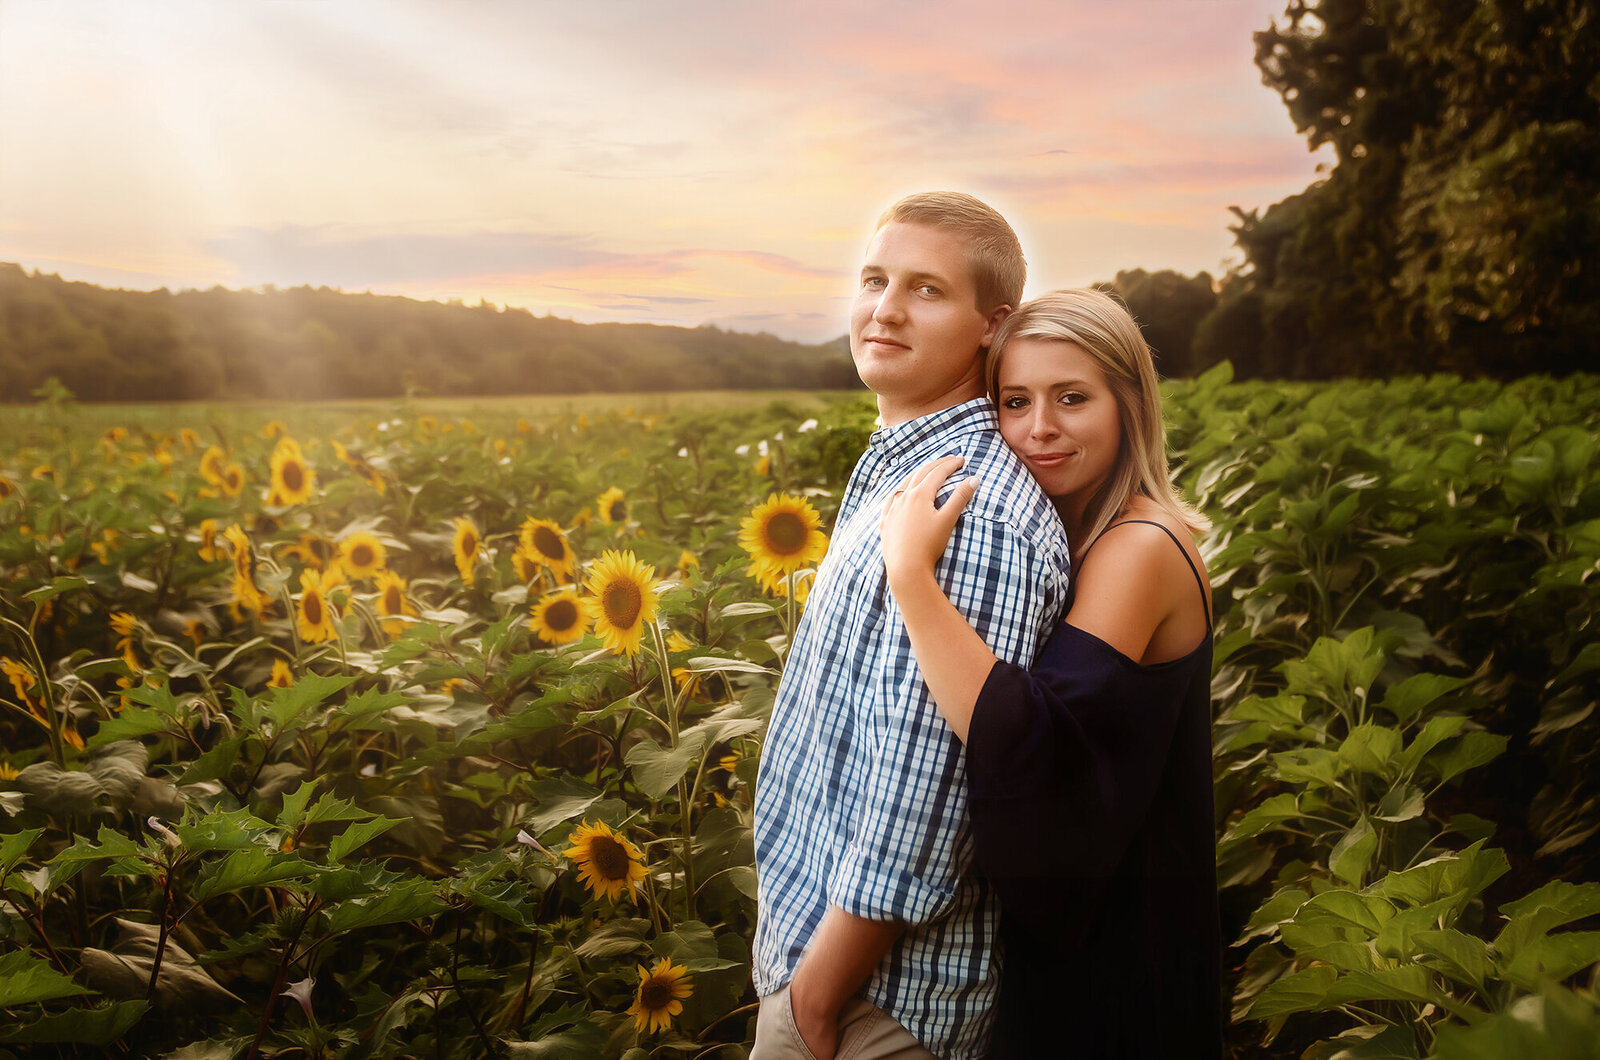 A couple poses for Engagement Photos in a sunflower field in Asheville, NC.